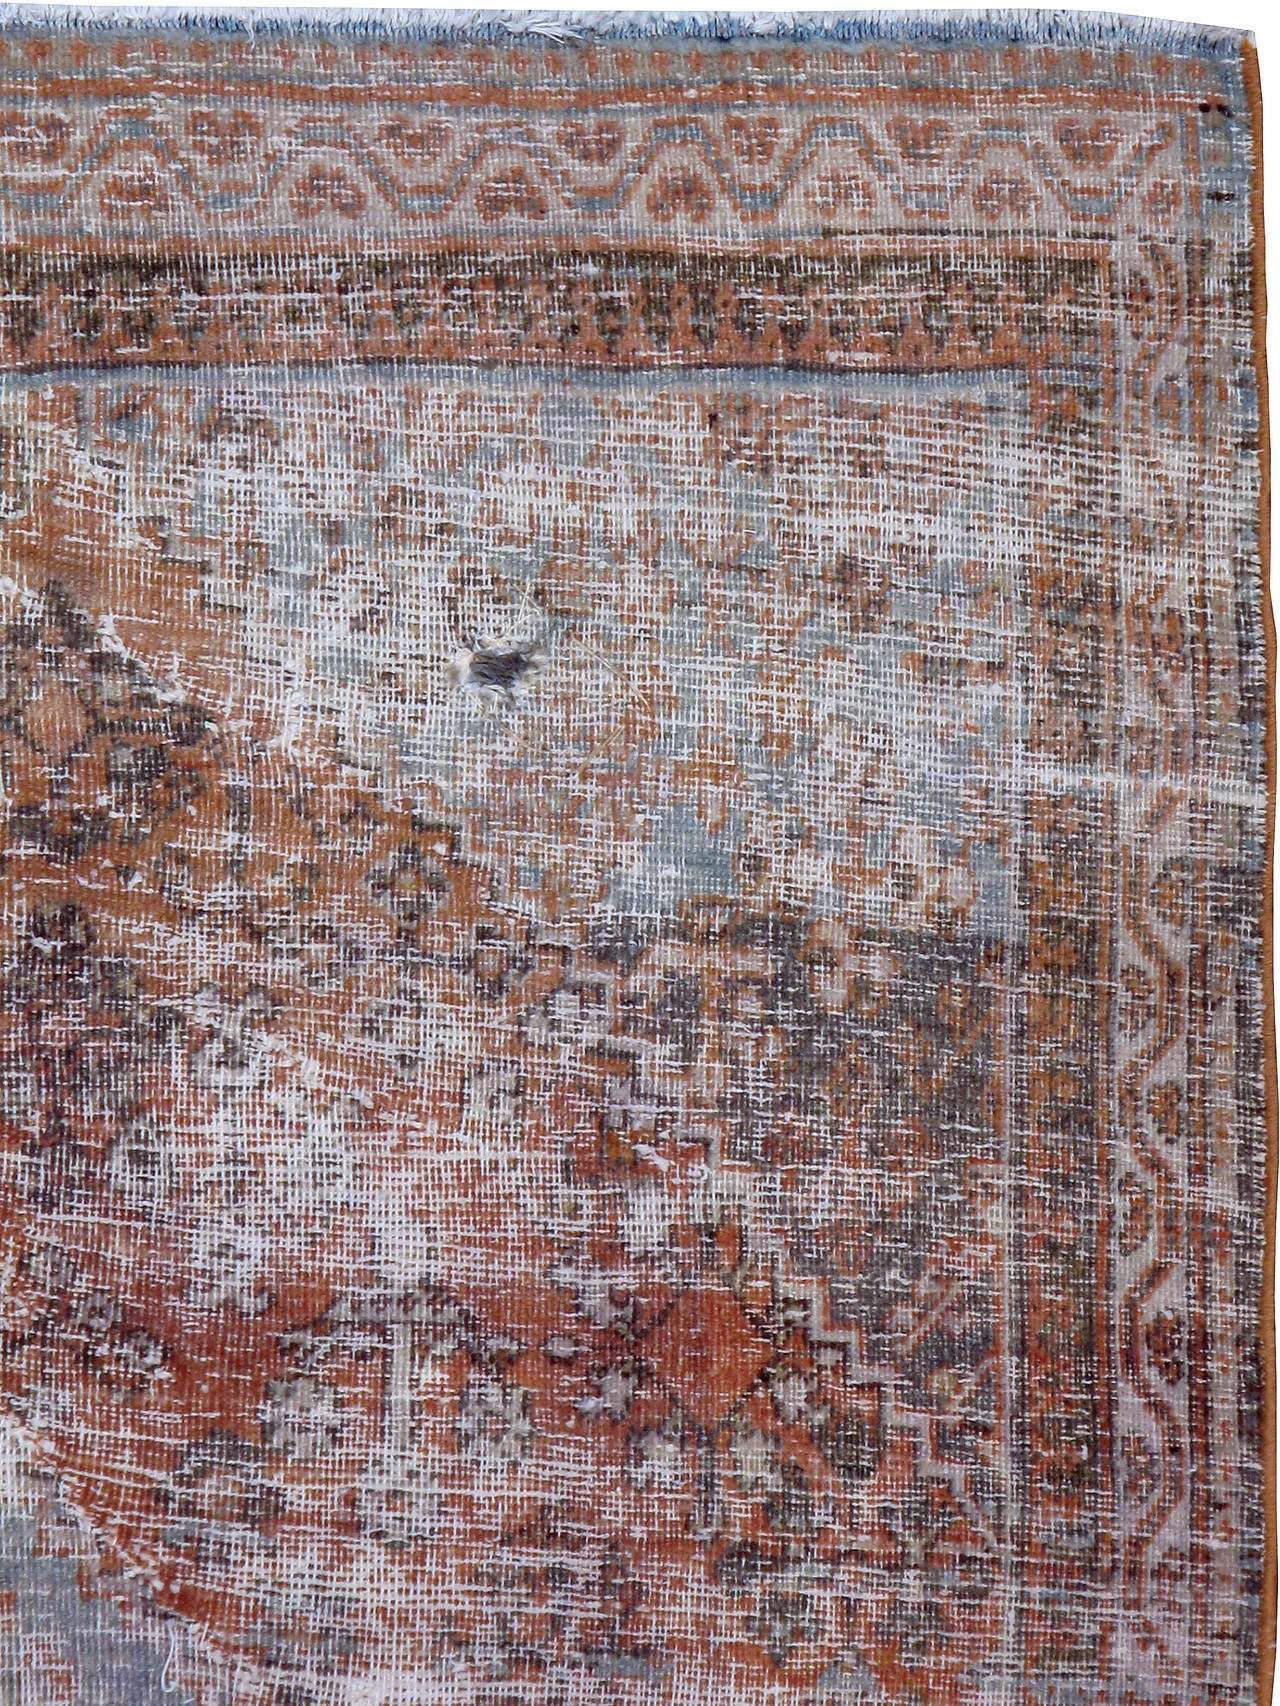 A weathered and distressed antique Persian Joshegan carpet from the first quarter of the 20th century.